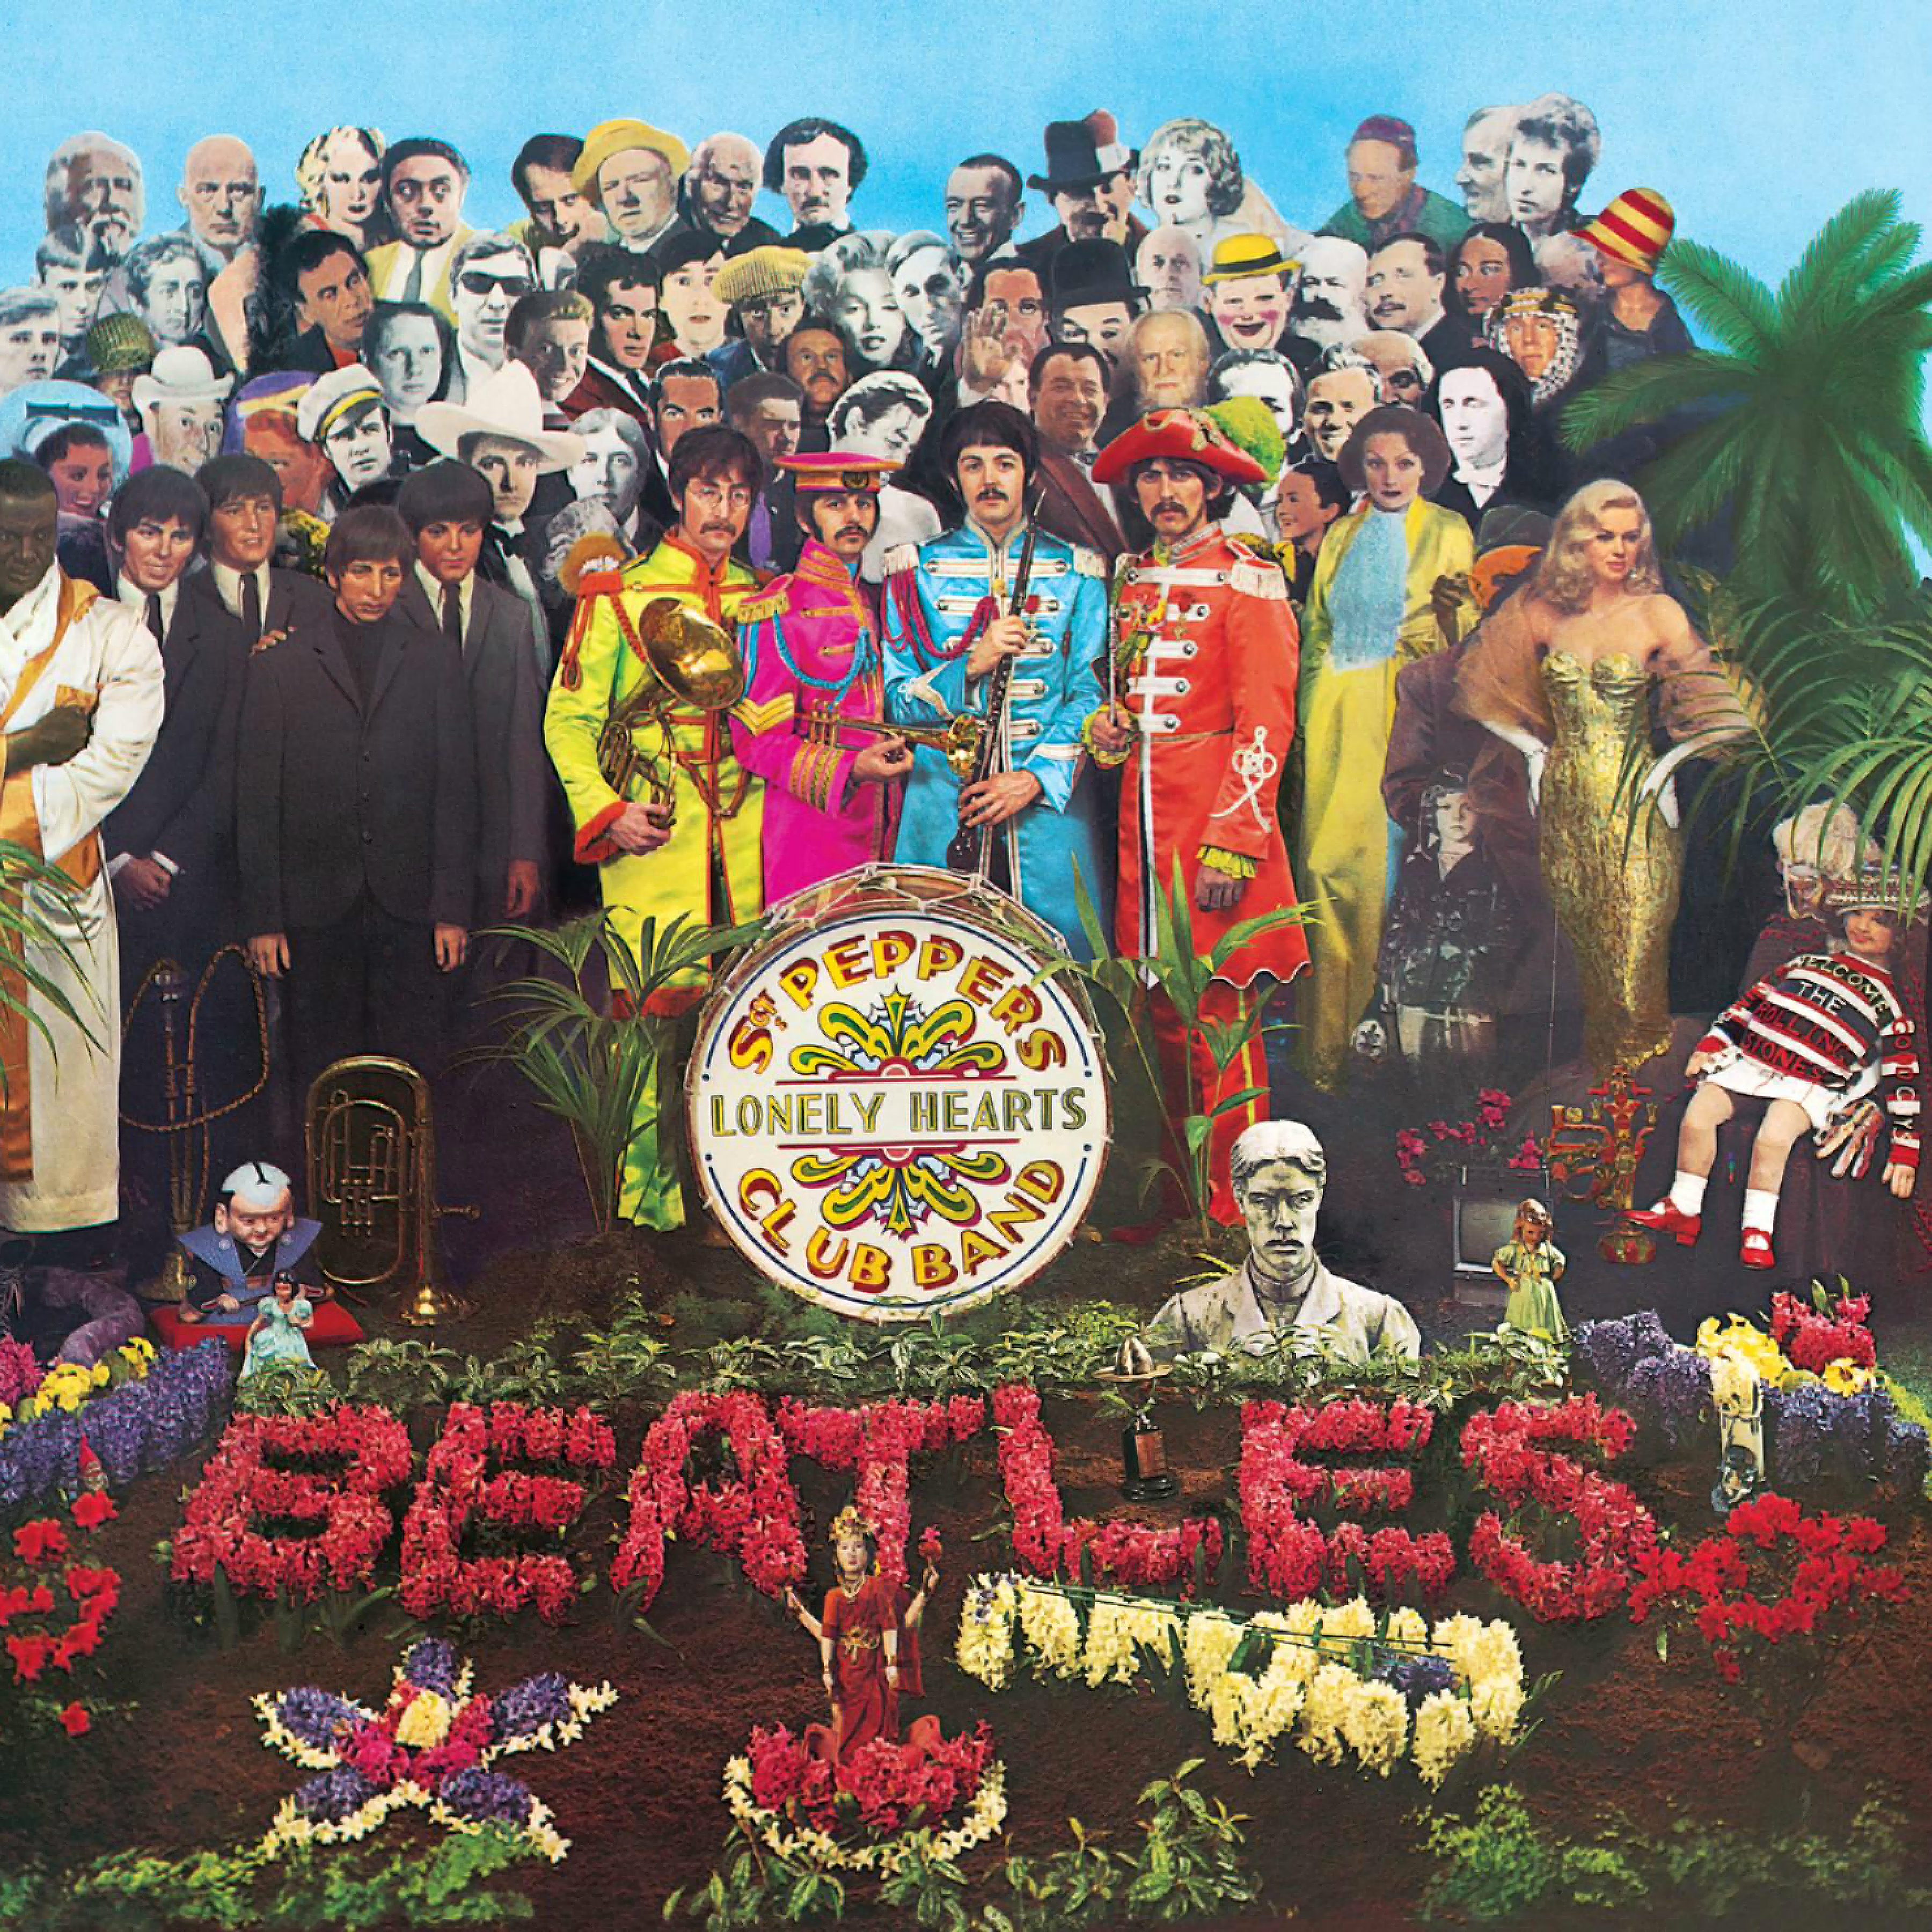 Sergeant Pepper’s Lonely Hearts Club Band